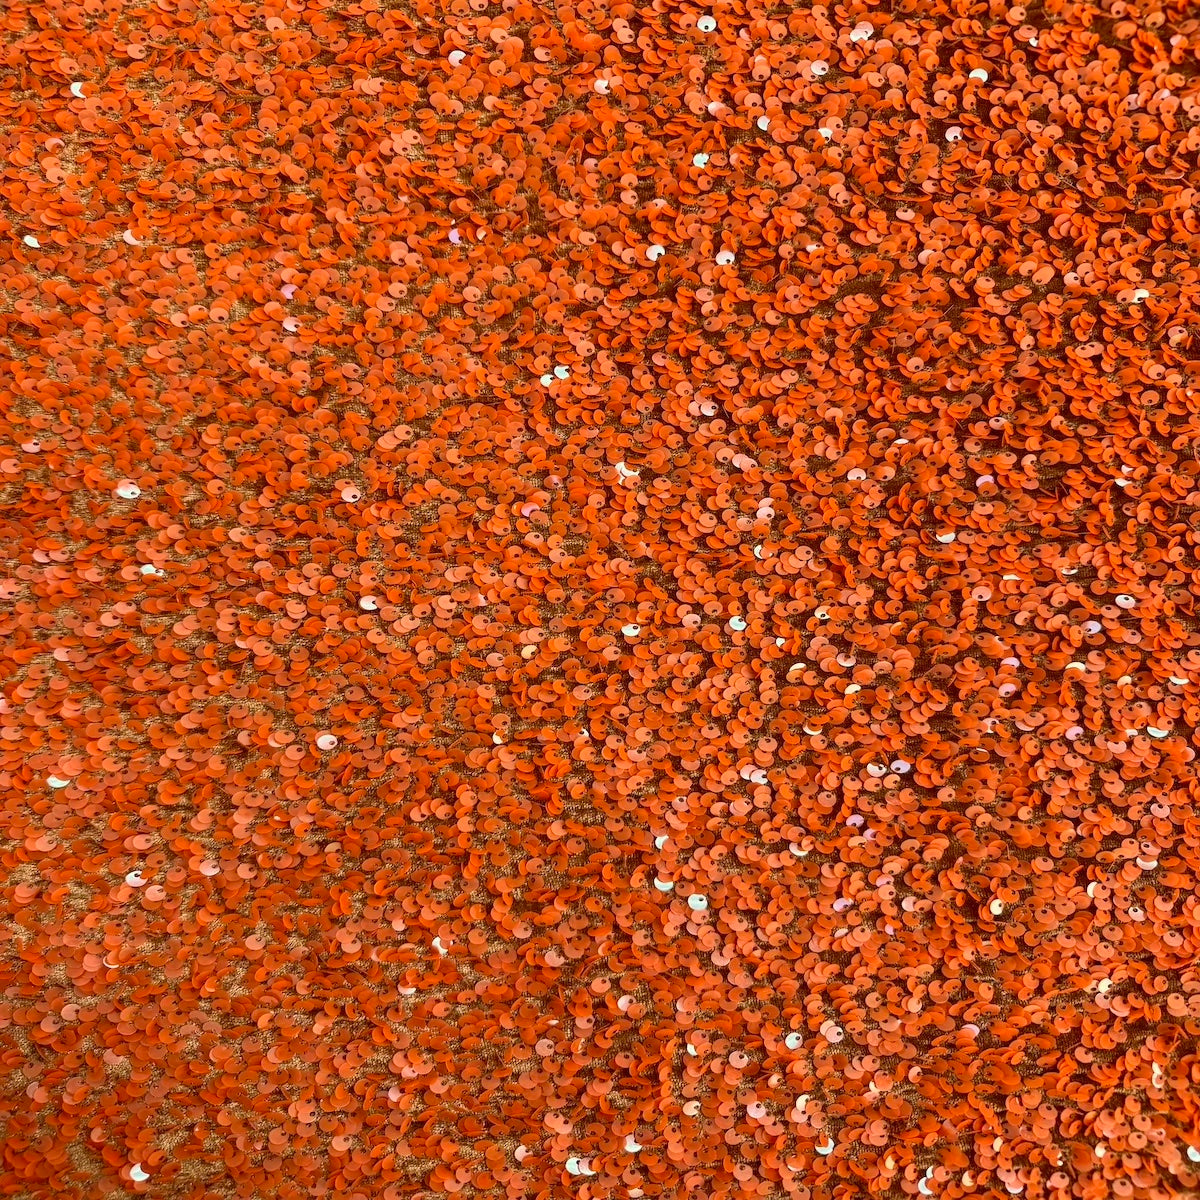 Rust Orange Sequins Embroidered Stretch Velvet Rodeo Fabric